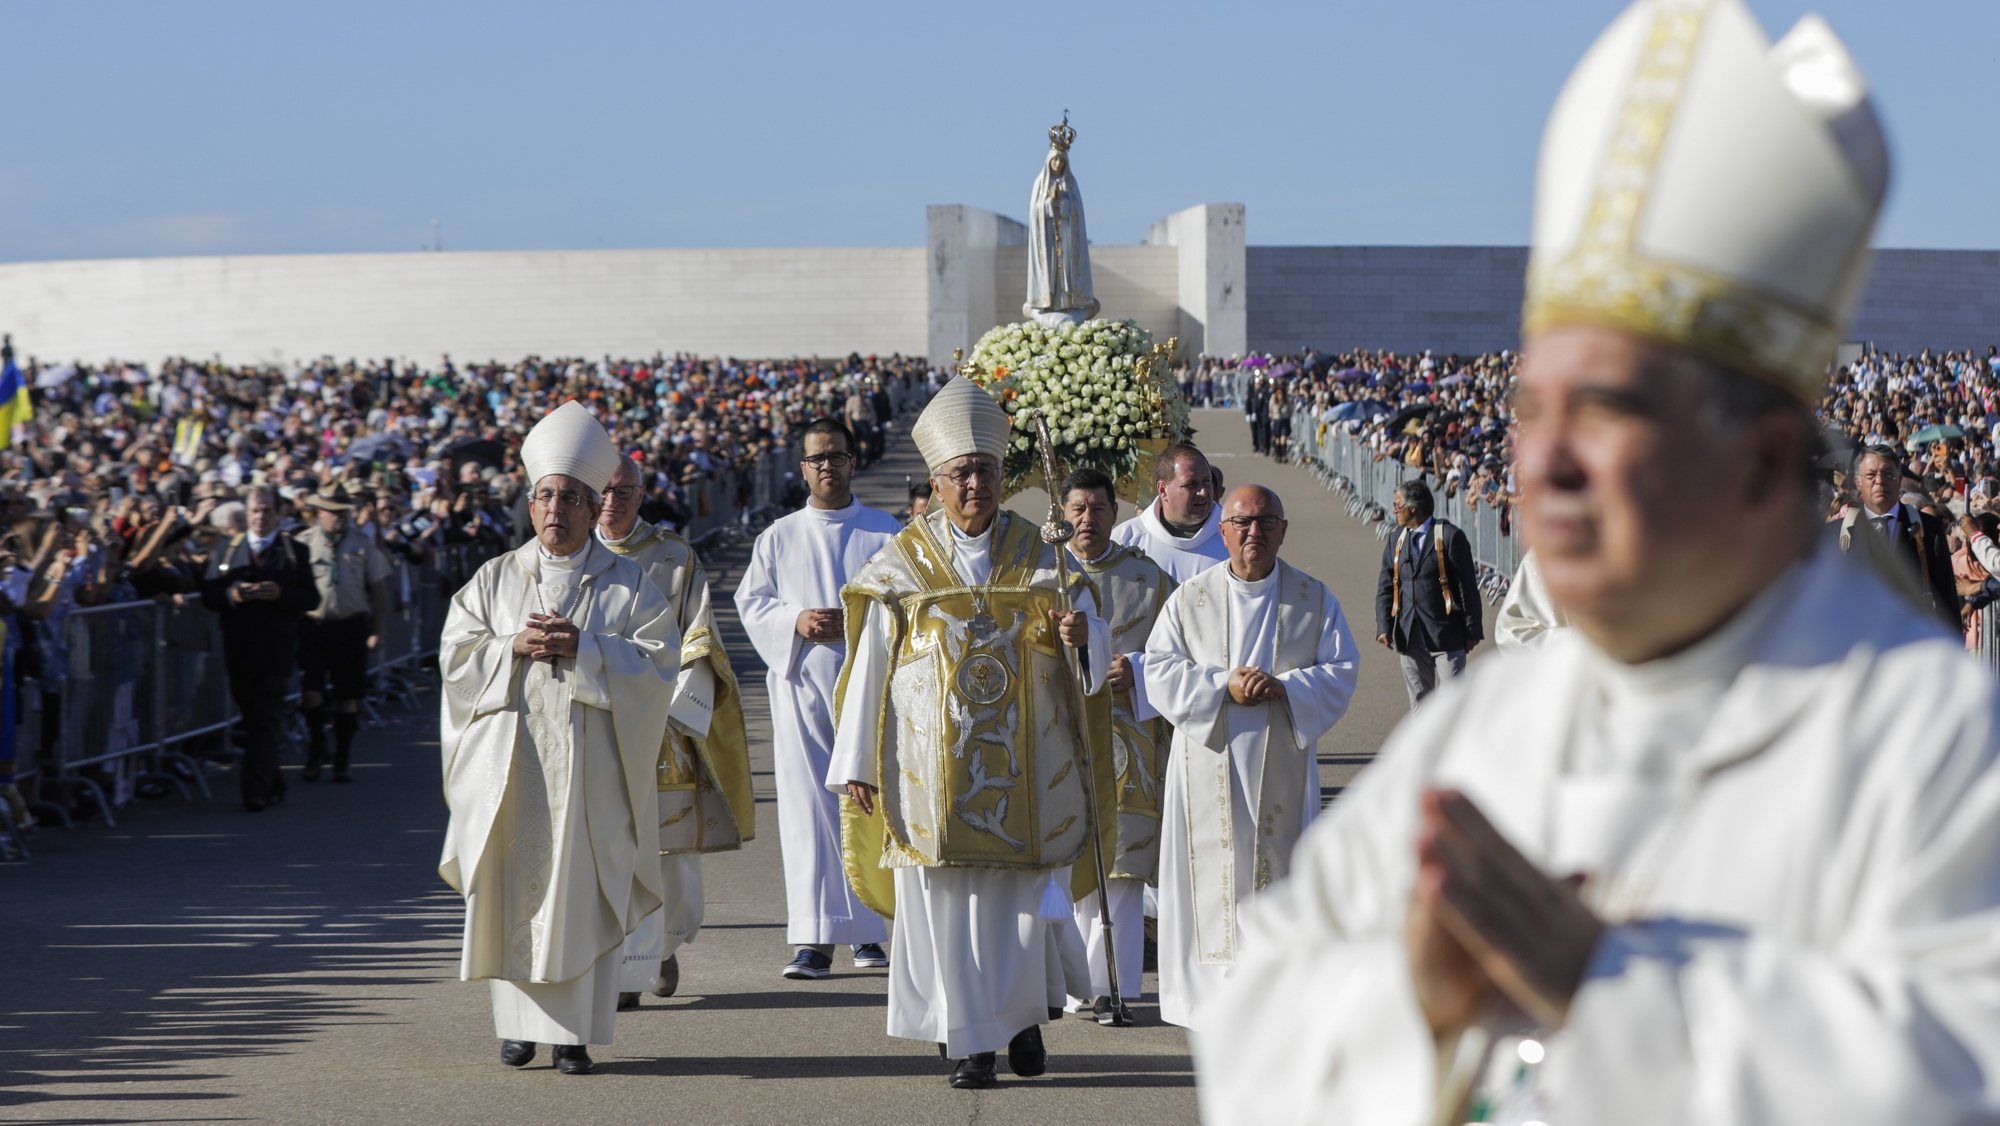 The bishop of Leiria and Fatima Dom Jose Ornelas (C) accompany the statue of Our Lady of Fatima is carried on a litter during the annual international pilgrimage on 12 and 13 October in the Shrine of Fatima, Portugal, 13 October 2022. PAULO CUNHA/LUSA